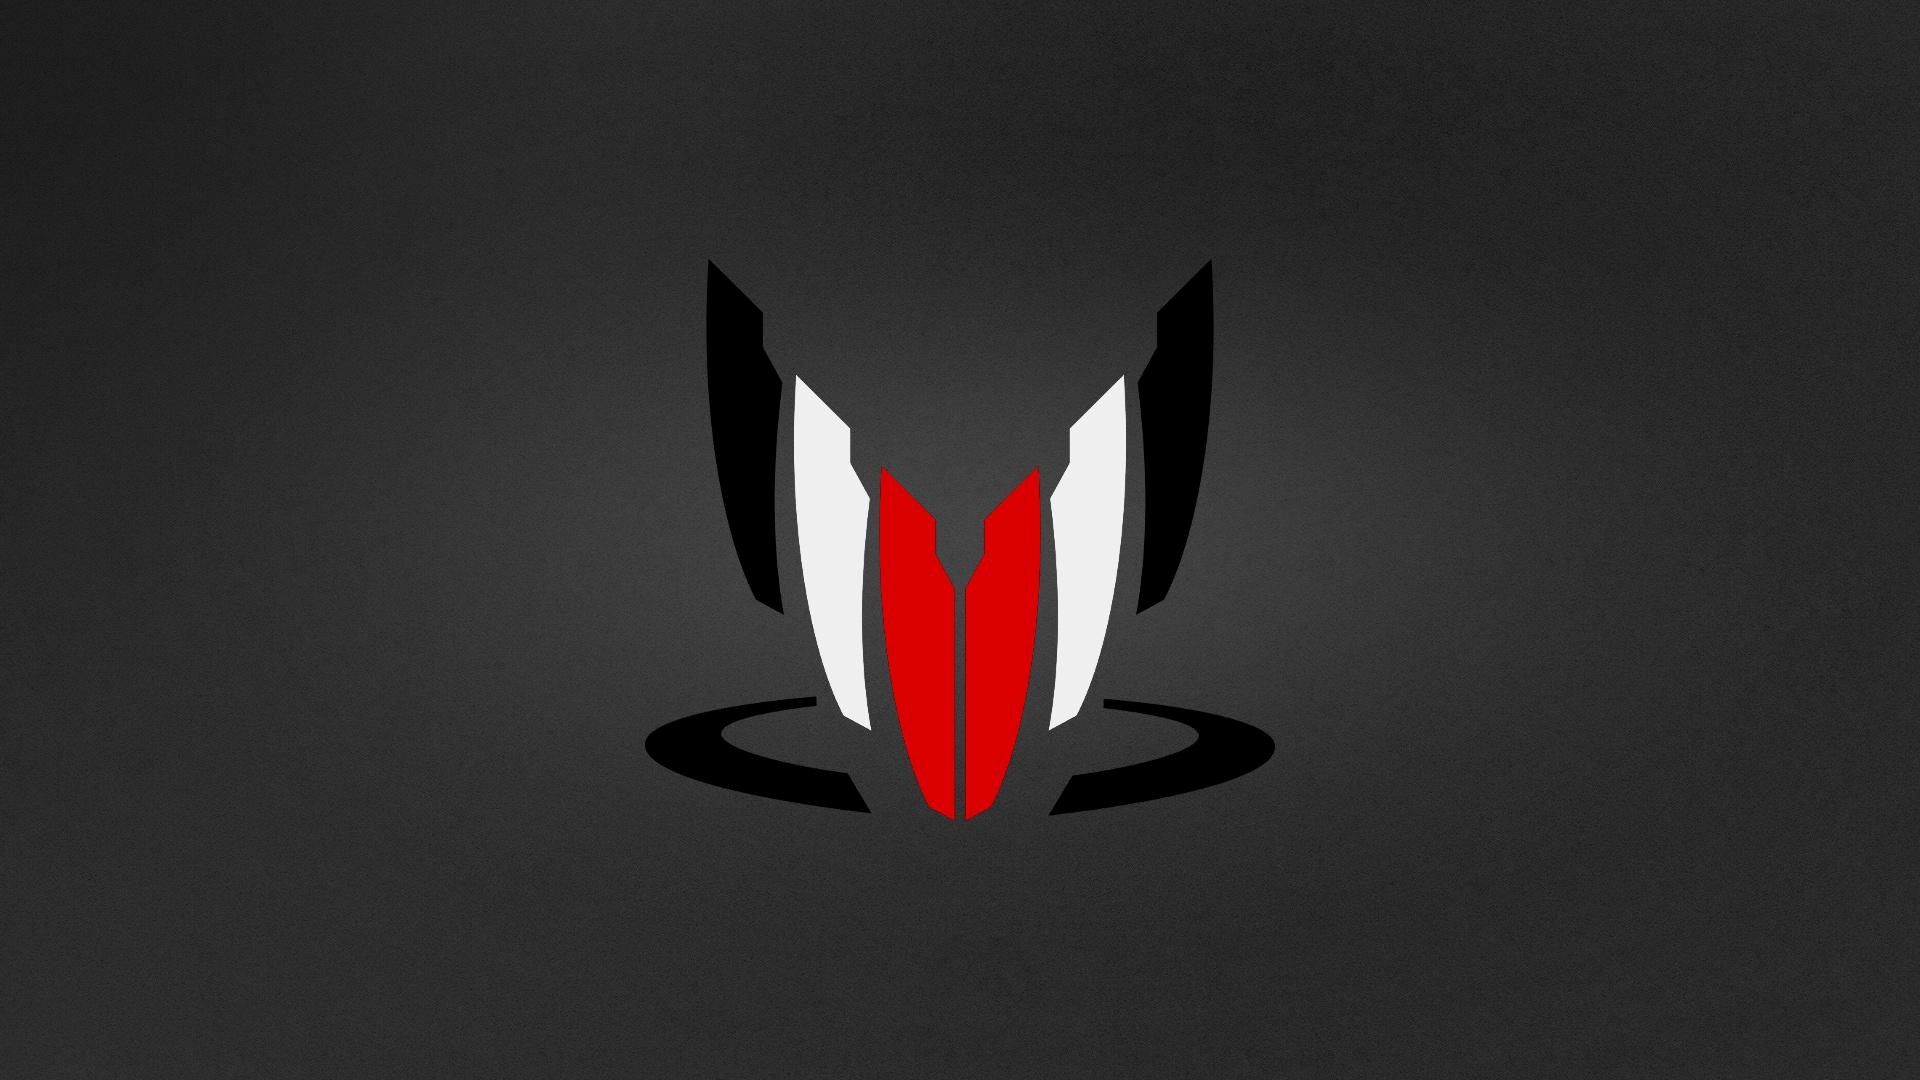 1920x1080 My brother made me a kickass wallpaper. Spectre logo with N7 colours, and  coming soon: Spectre logo with Cerberus colours.